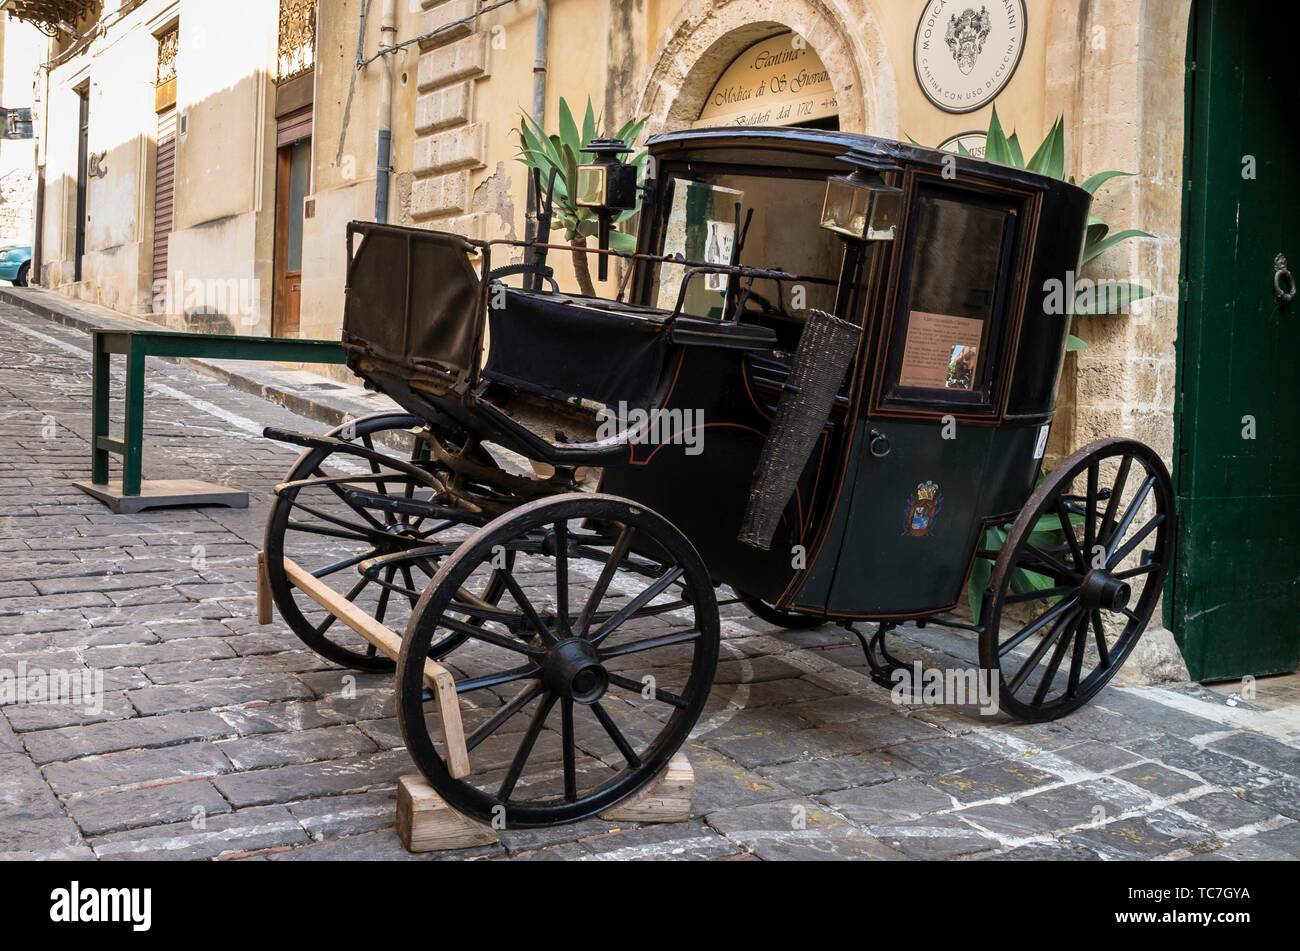 Horse carriage, Noto, Siracuse, Sicily, Italy. Stock Photo